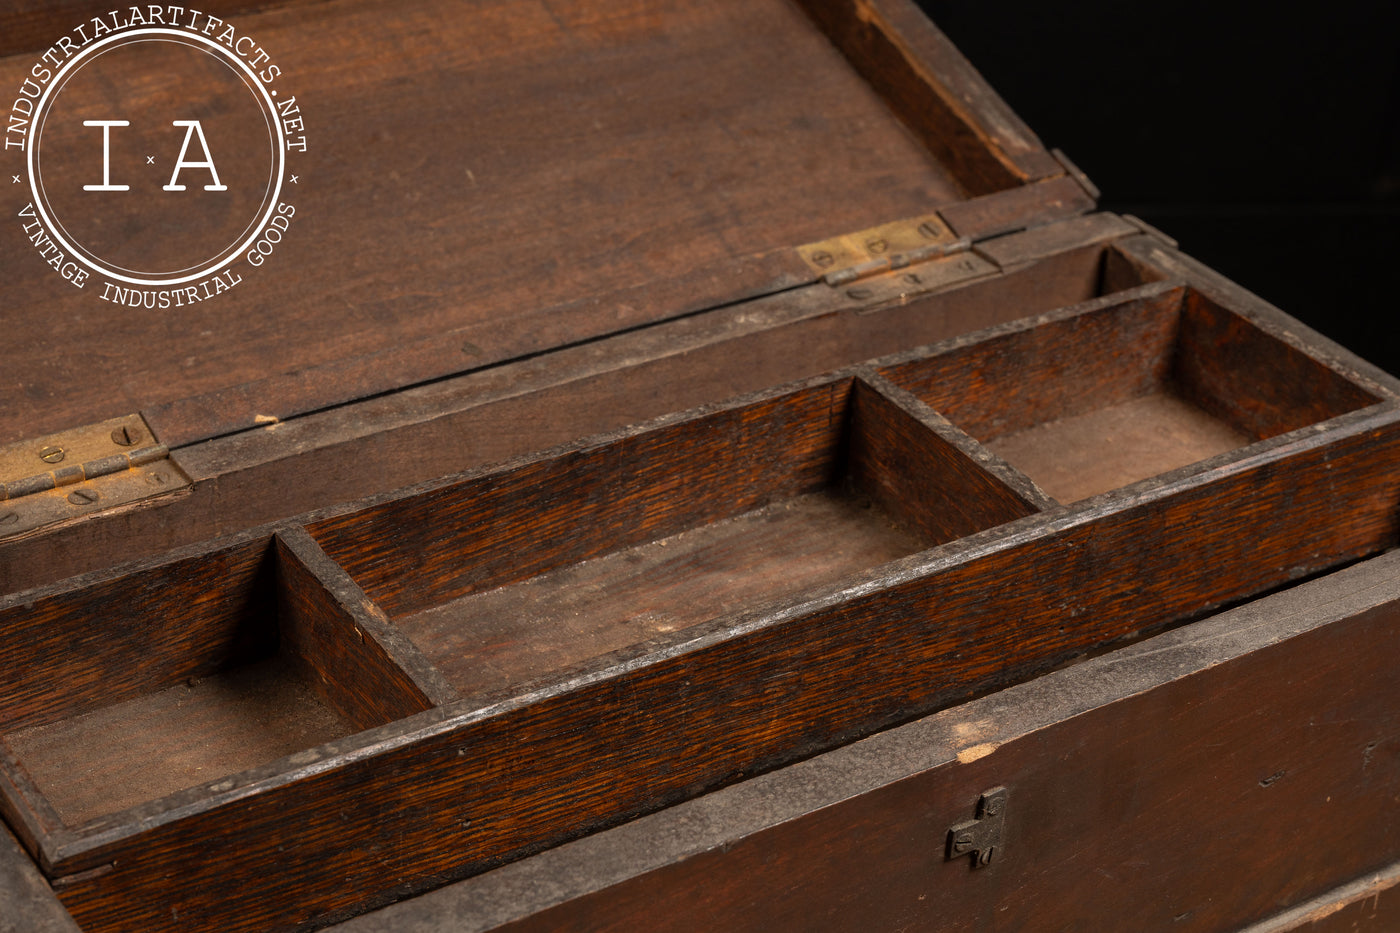 Early 20th Century Machinist Tool Chest with Floating Compartment Tray